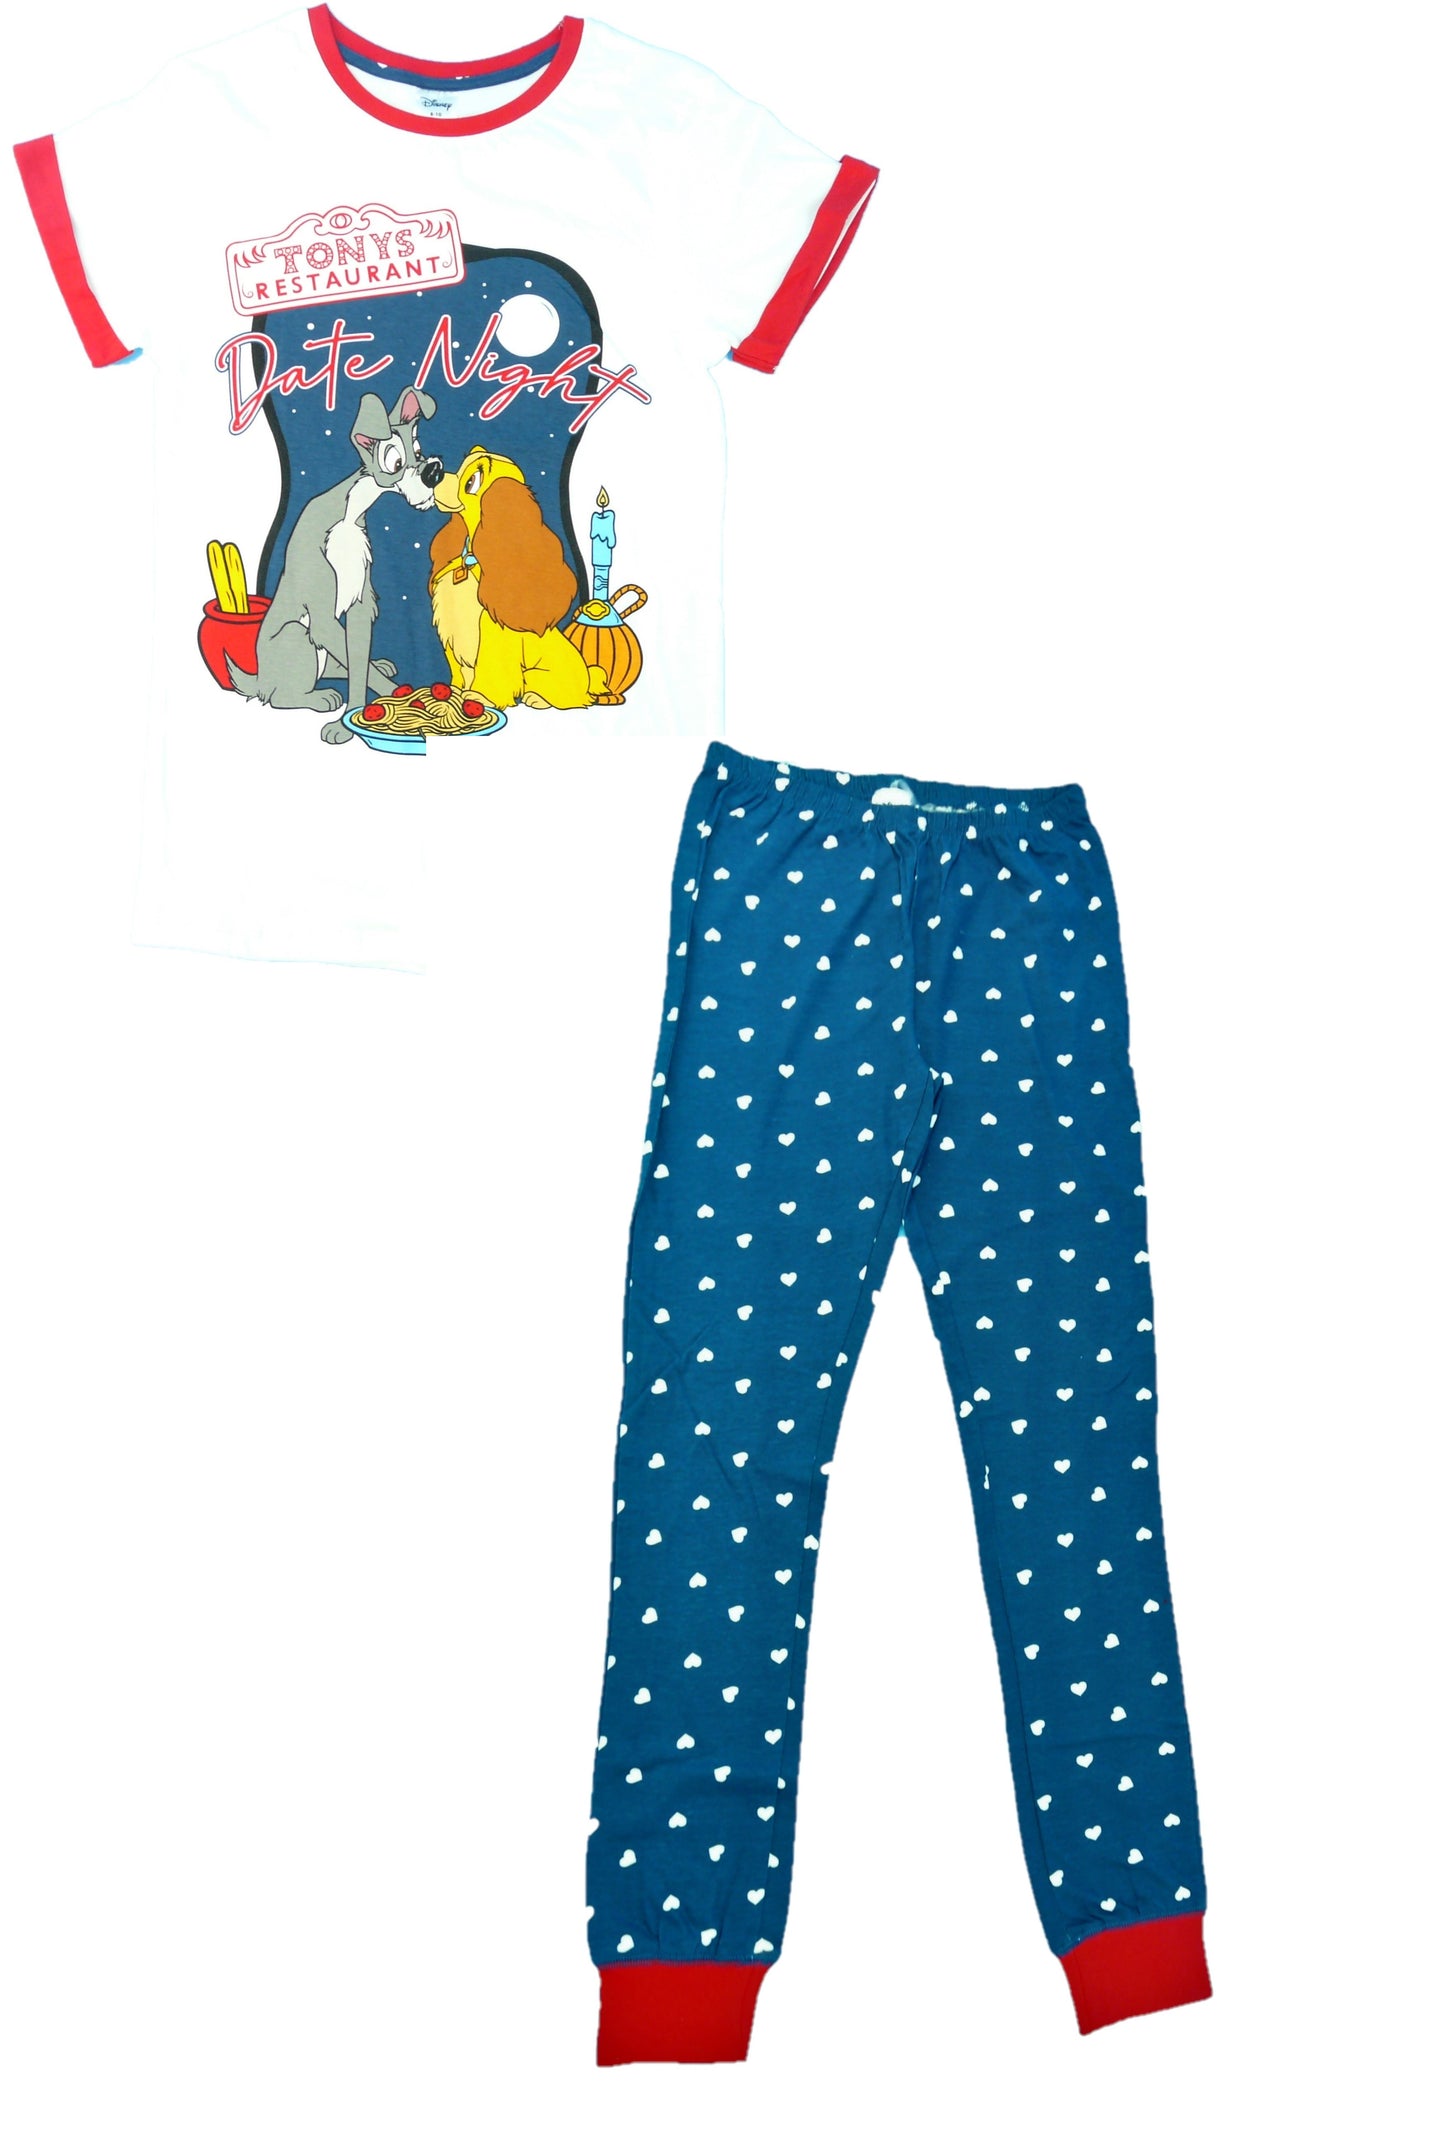 Lady and the Tramp Ladies Pyjamas "Date Night" - Ideal Christmas Gift